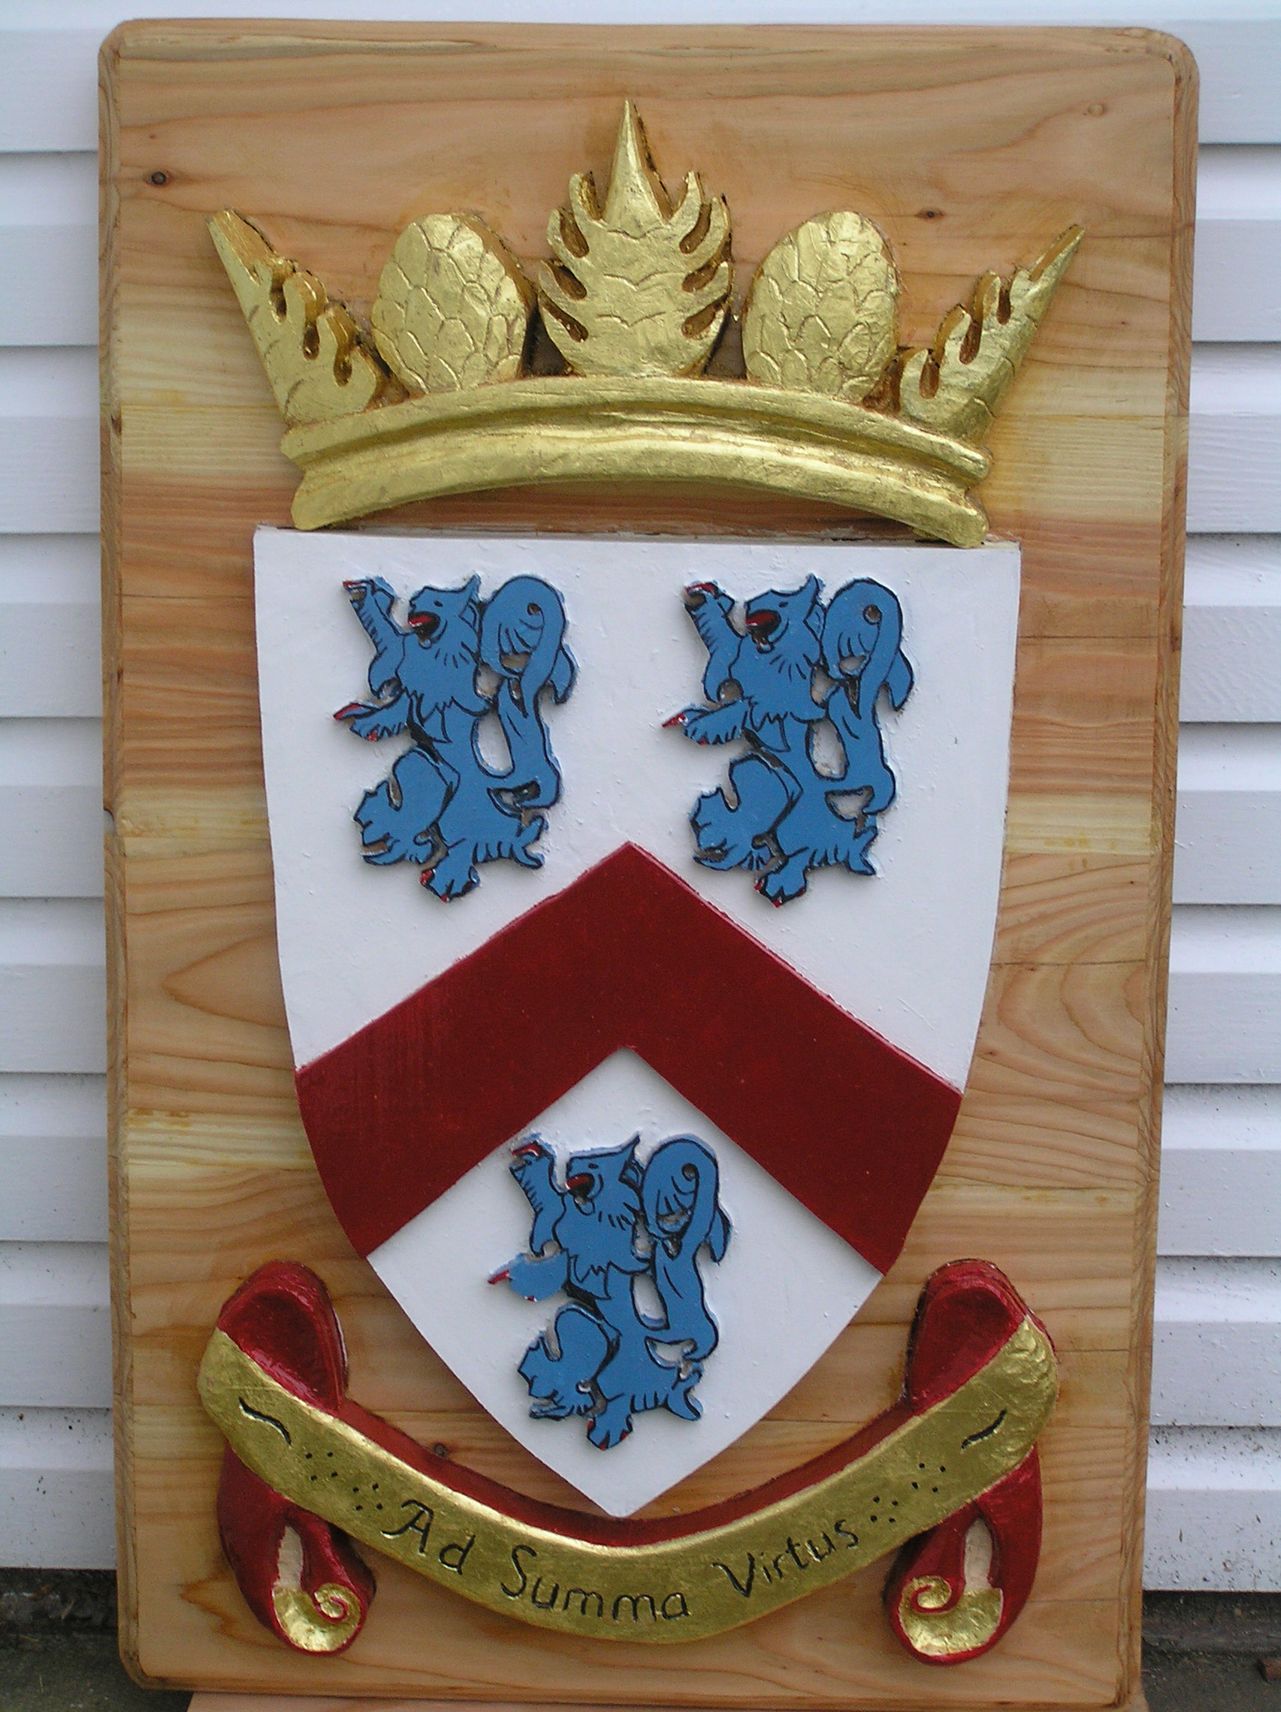 Hand crafted and gilded coat of arms made by Ingrained Culture.